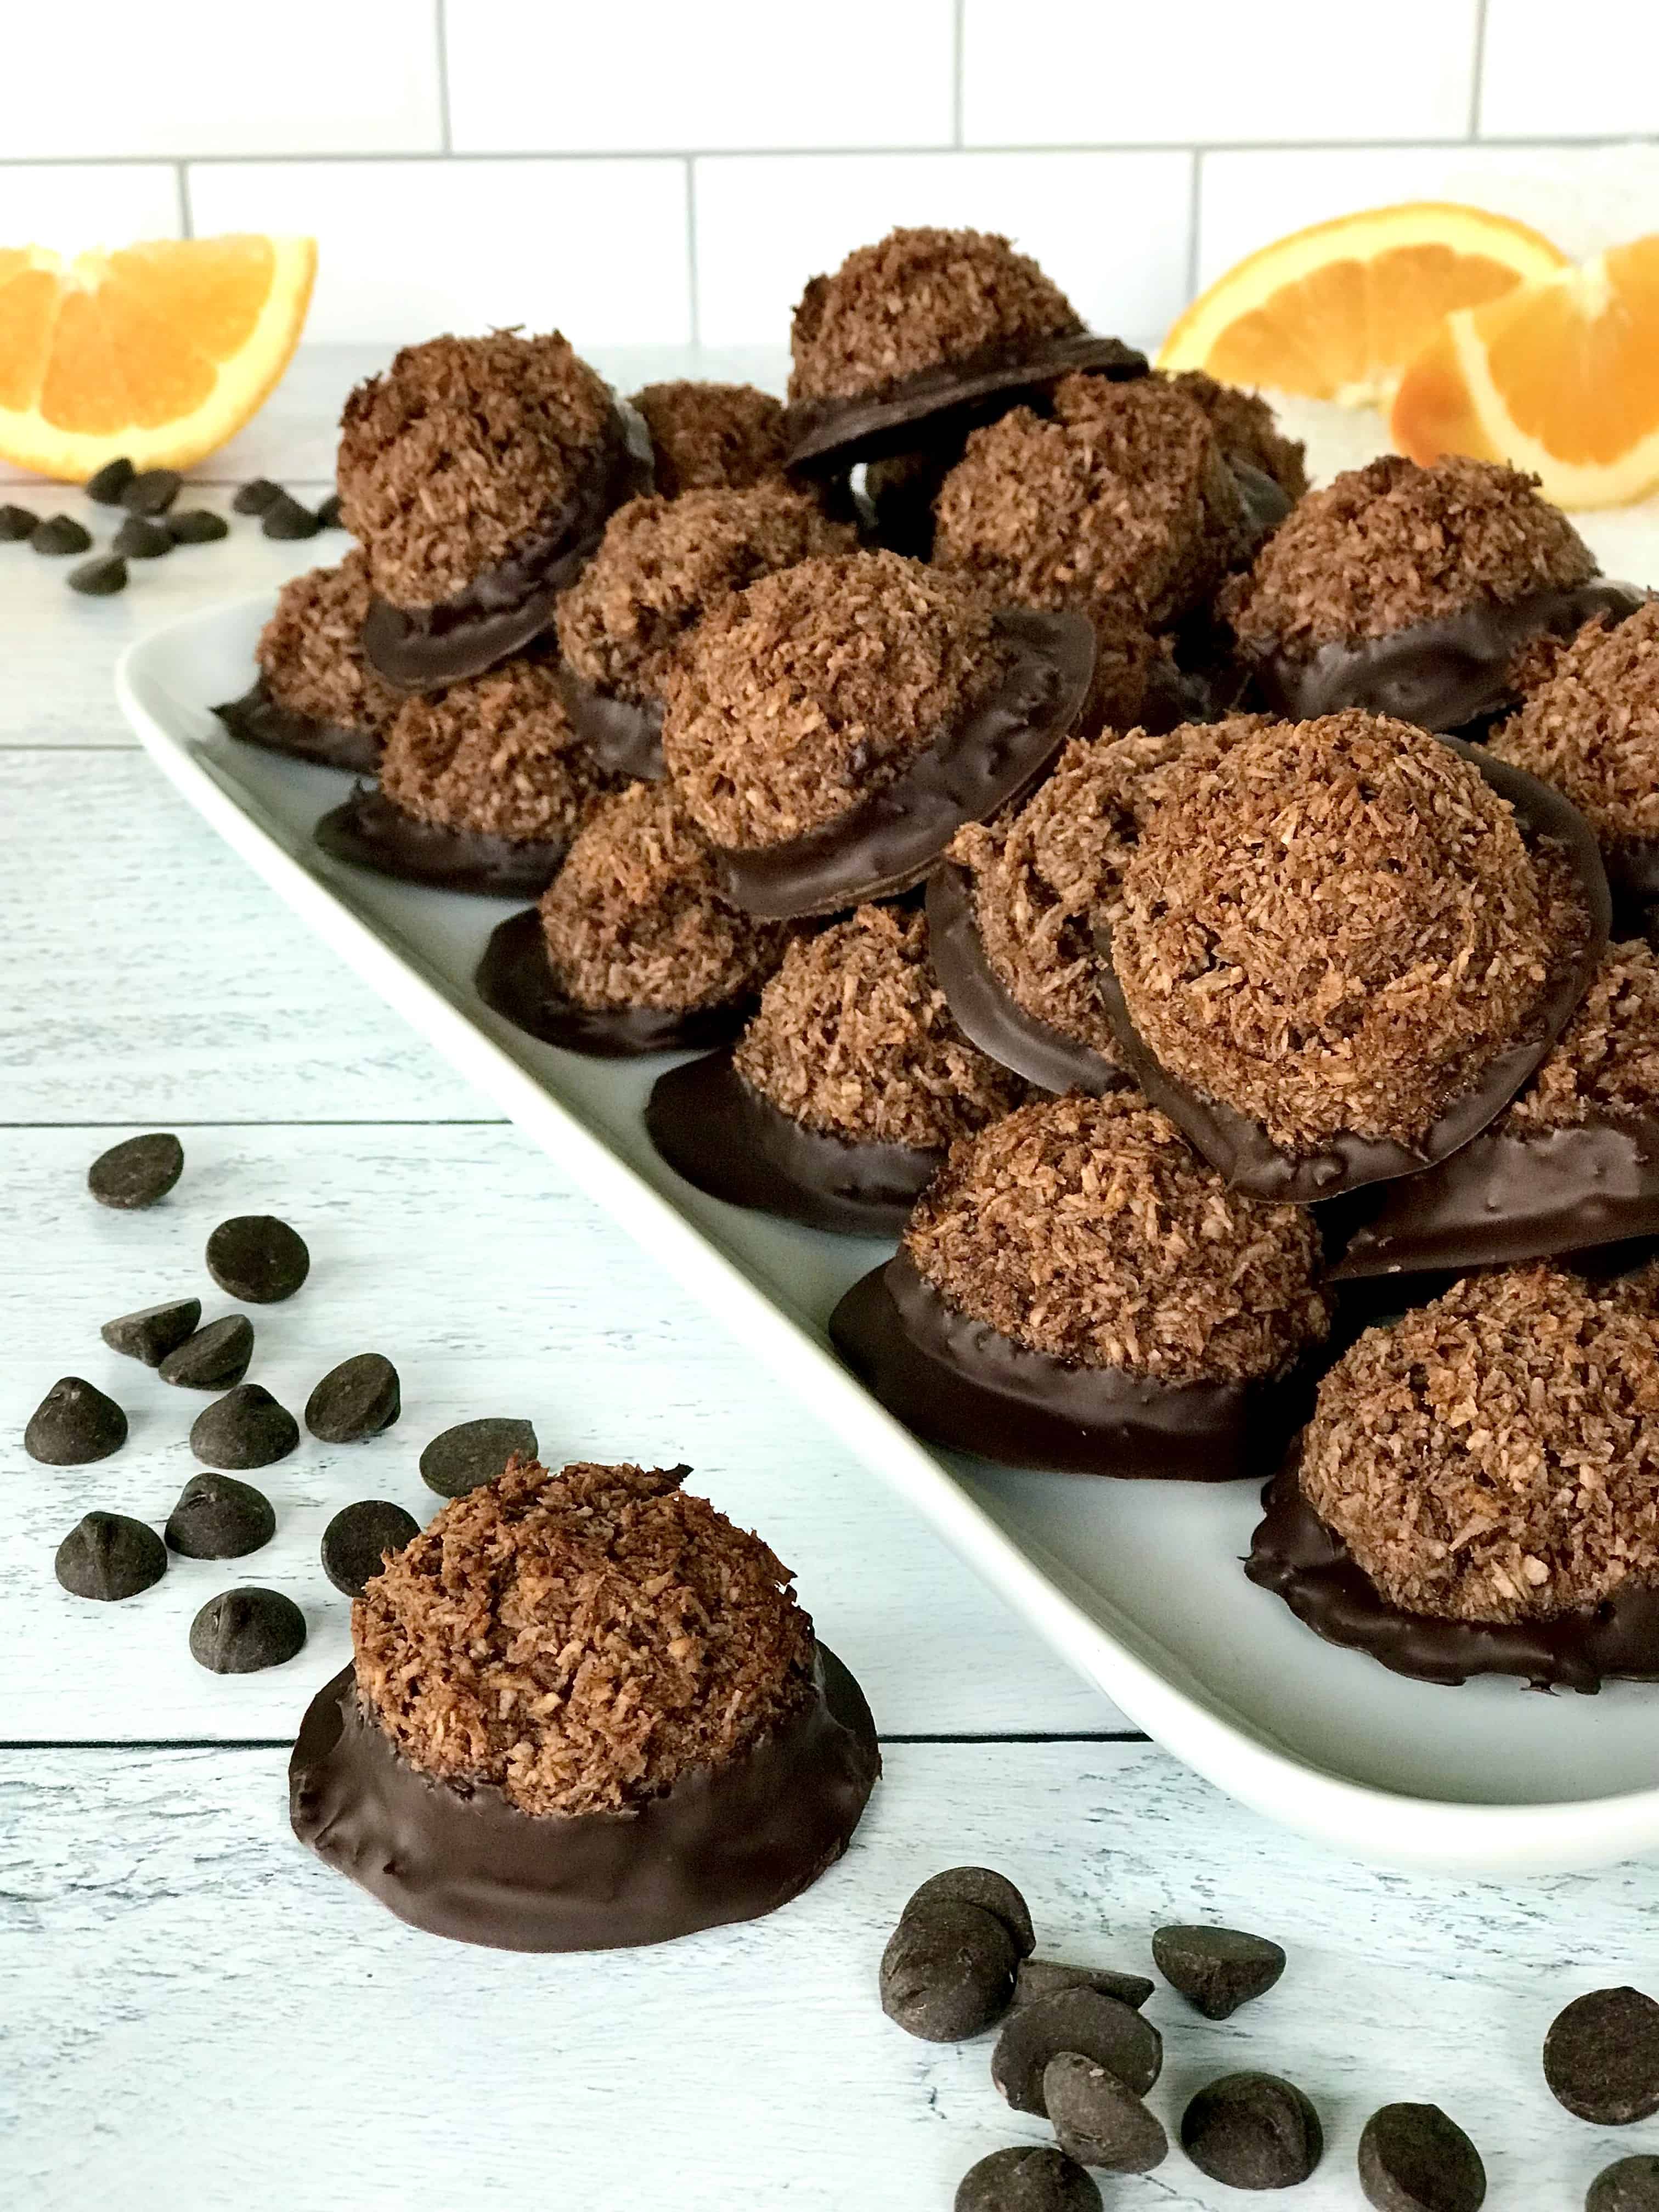 gluten-free macaroons made with cocoa powder and orange zest, piled onto a white platter